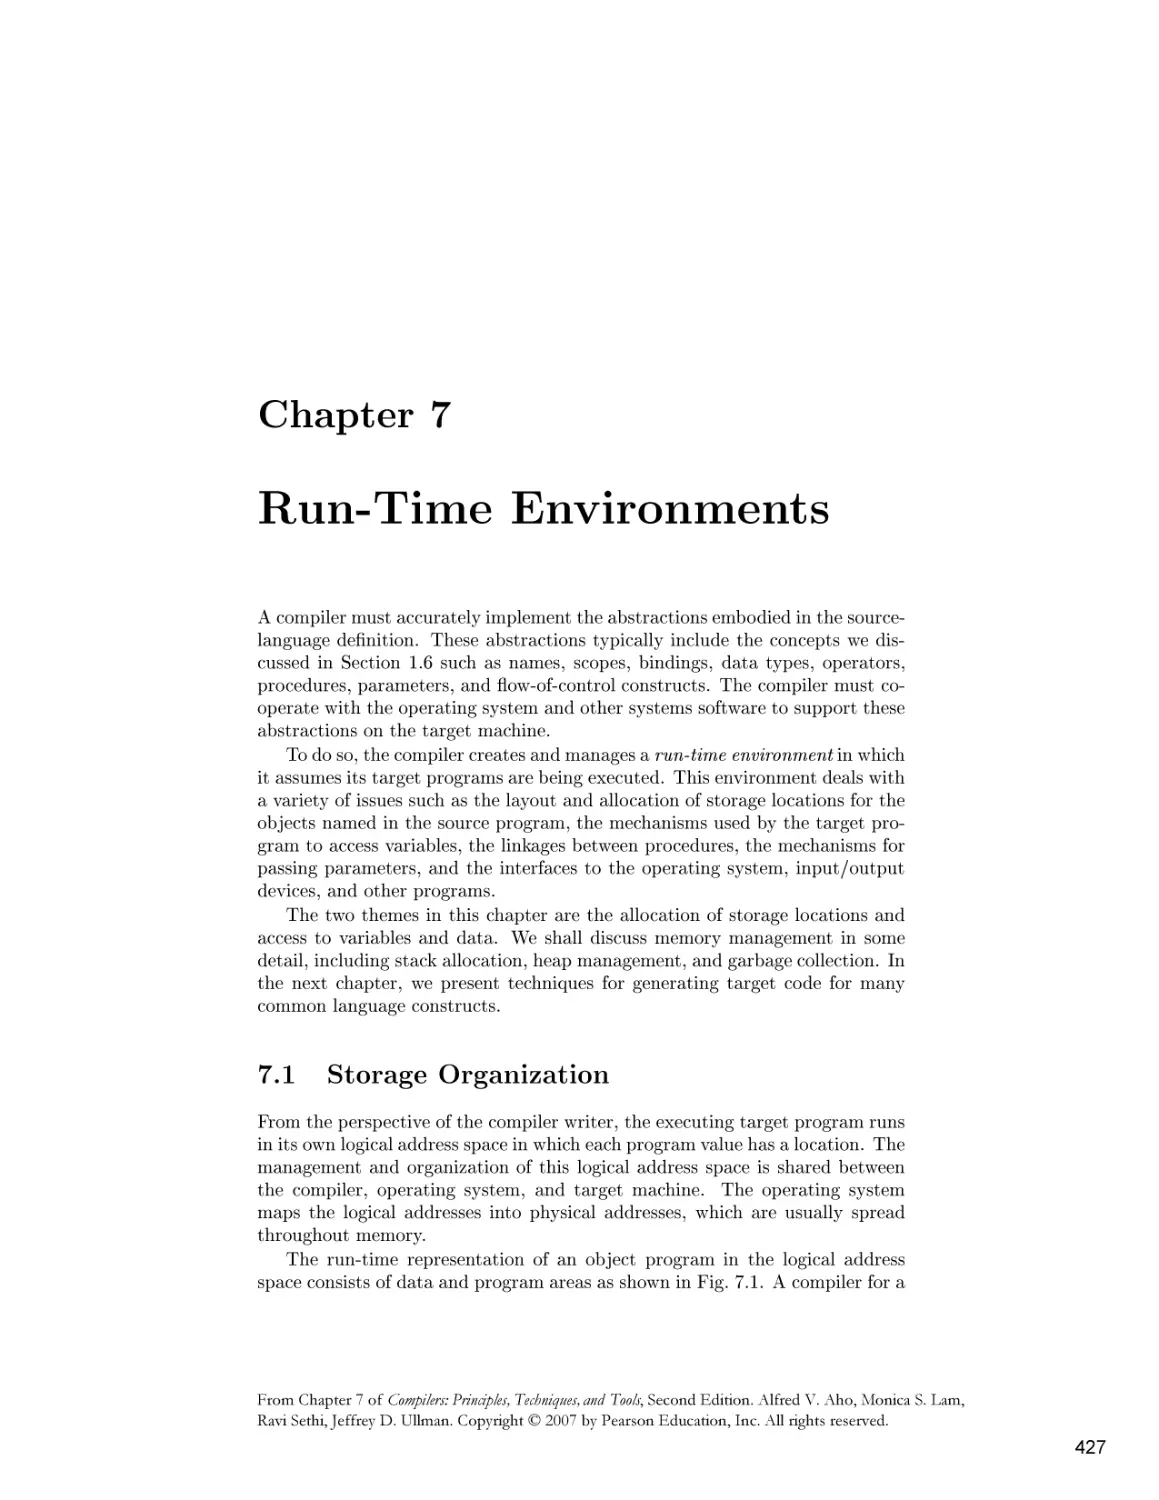 Chapter 7. Run-Time Environments